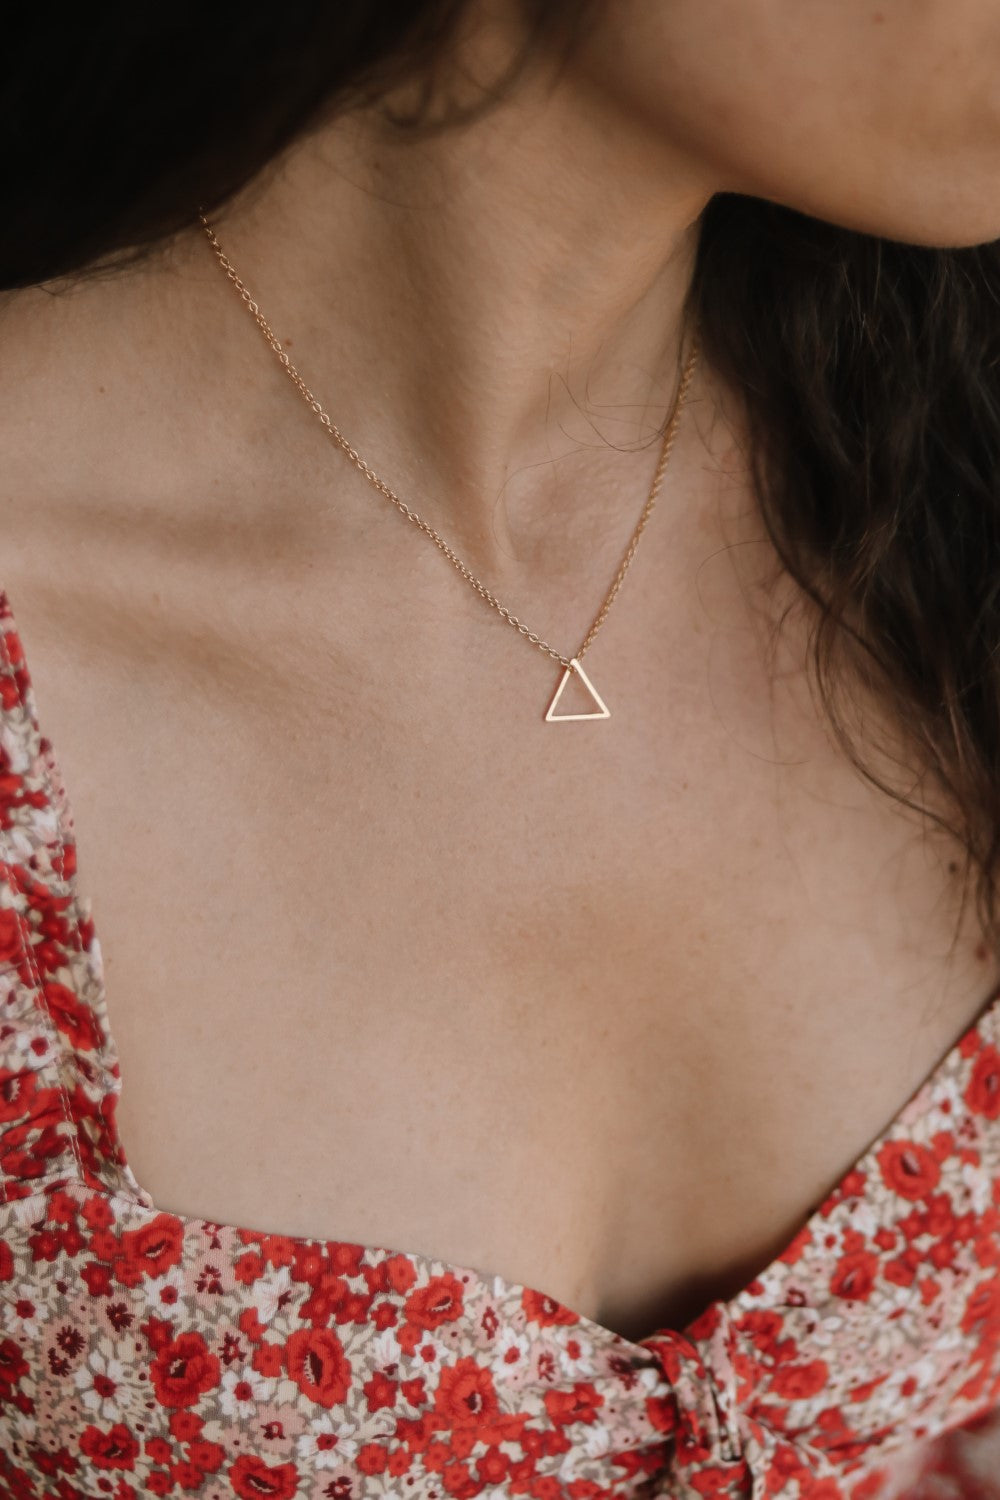 Upside Down Triangle Necklace, Pendant, Chain, Geometric, Jewellery,  Jewelry, Gift, Various Lengths, Gold, Silver, Dainty, Extender